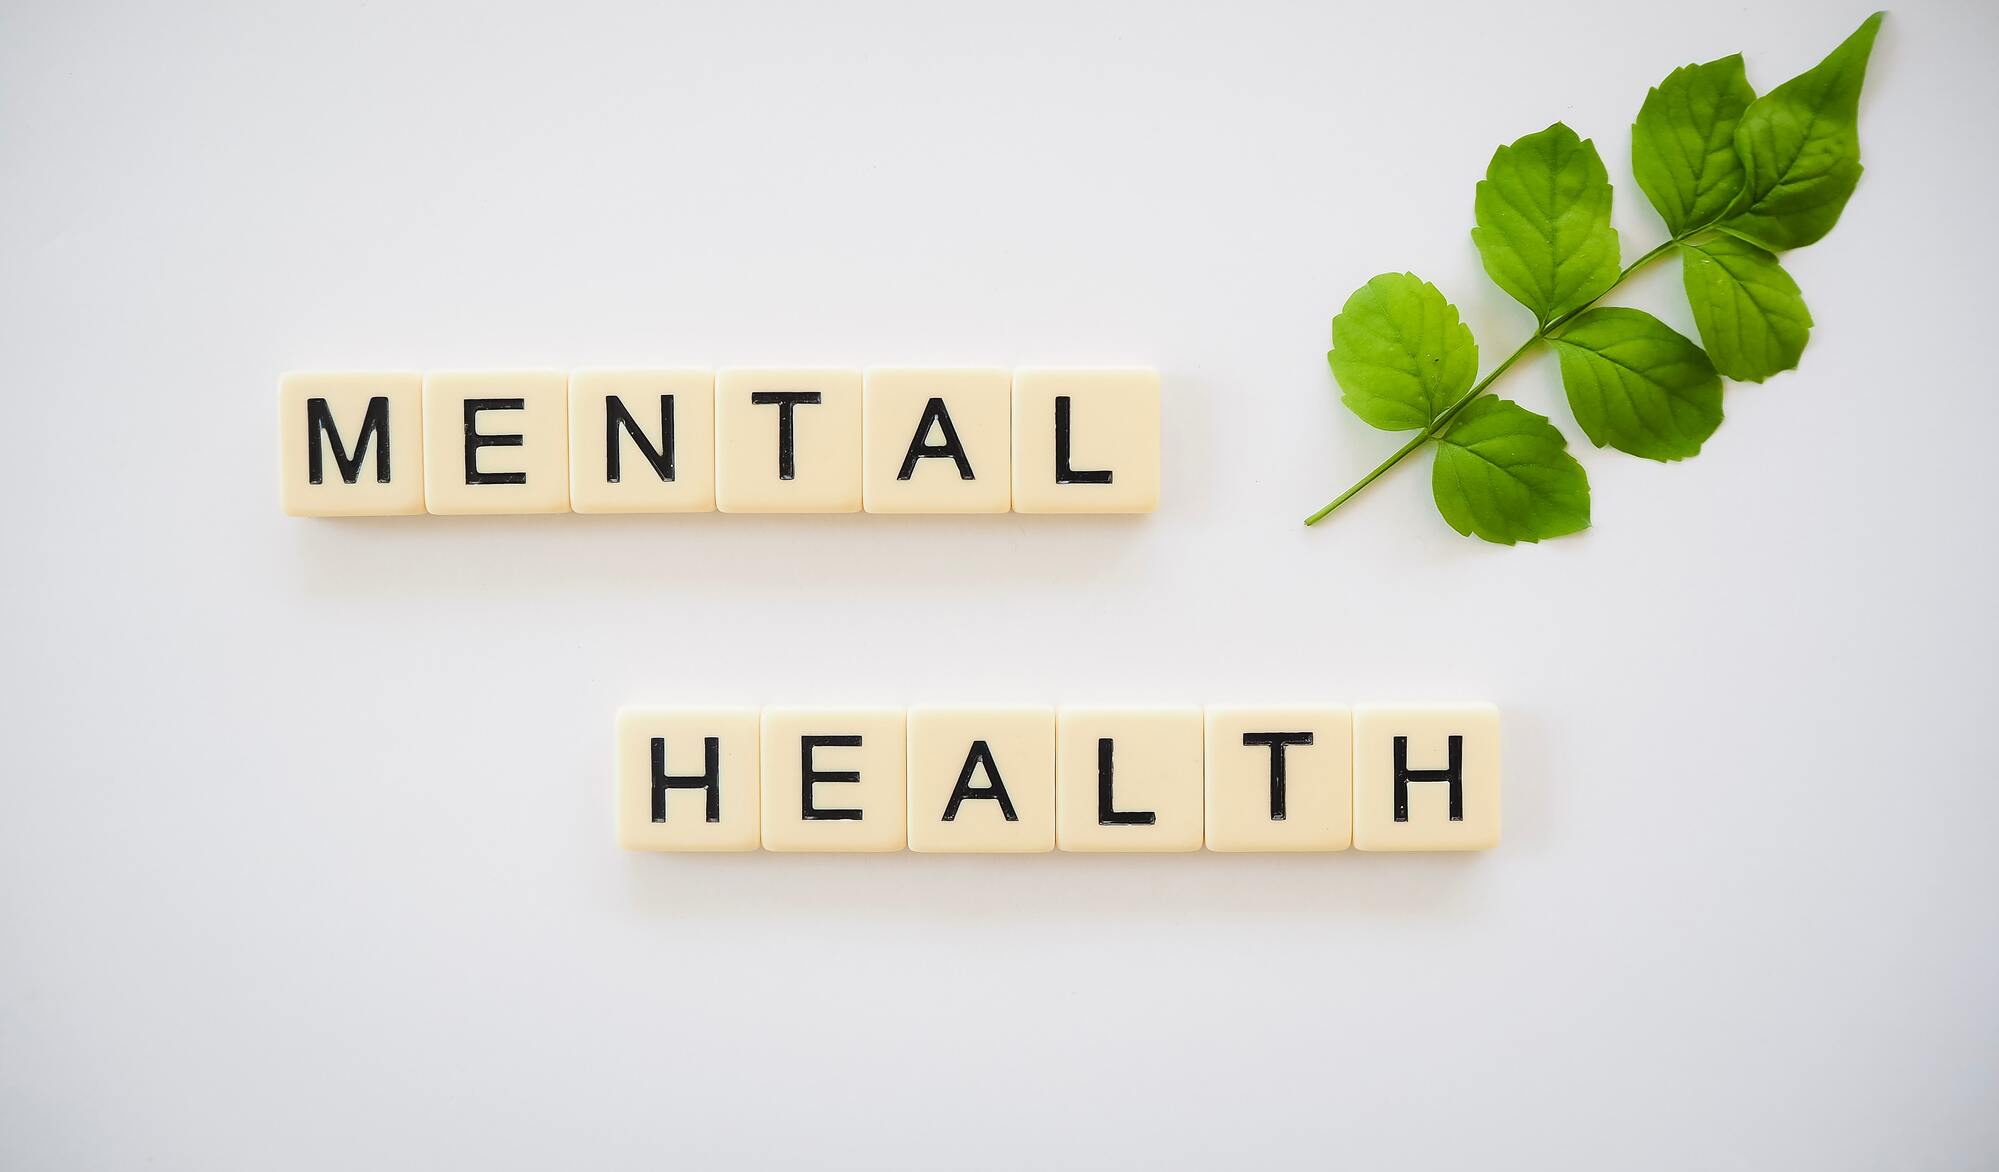 3 Activities That Are Good for Your Mental Health